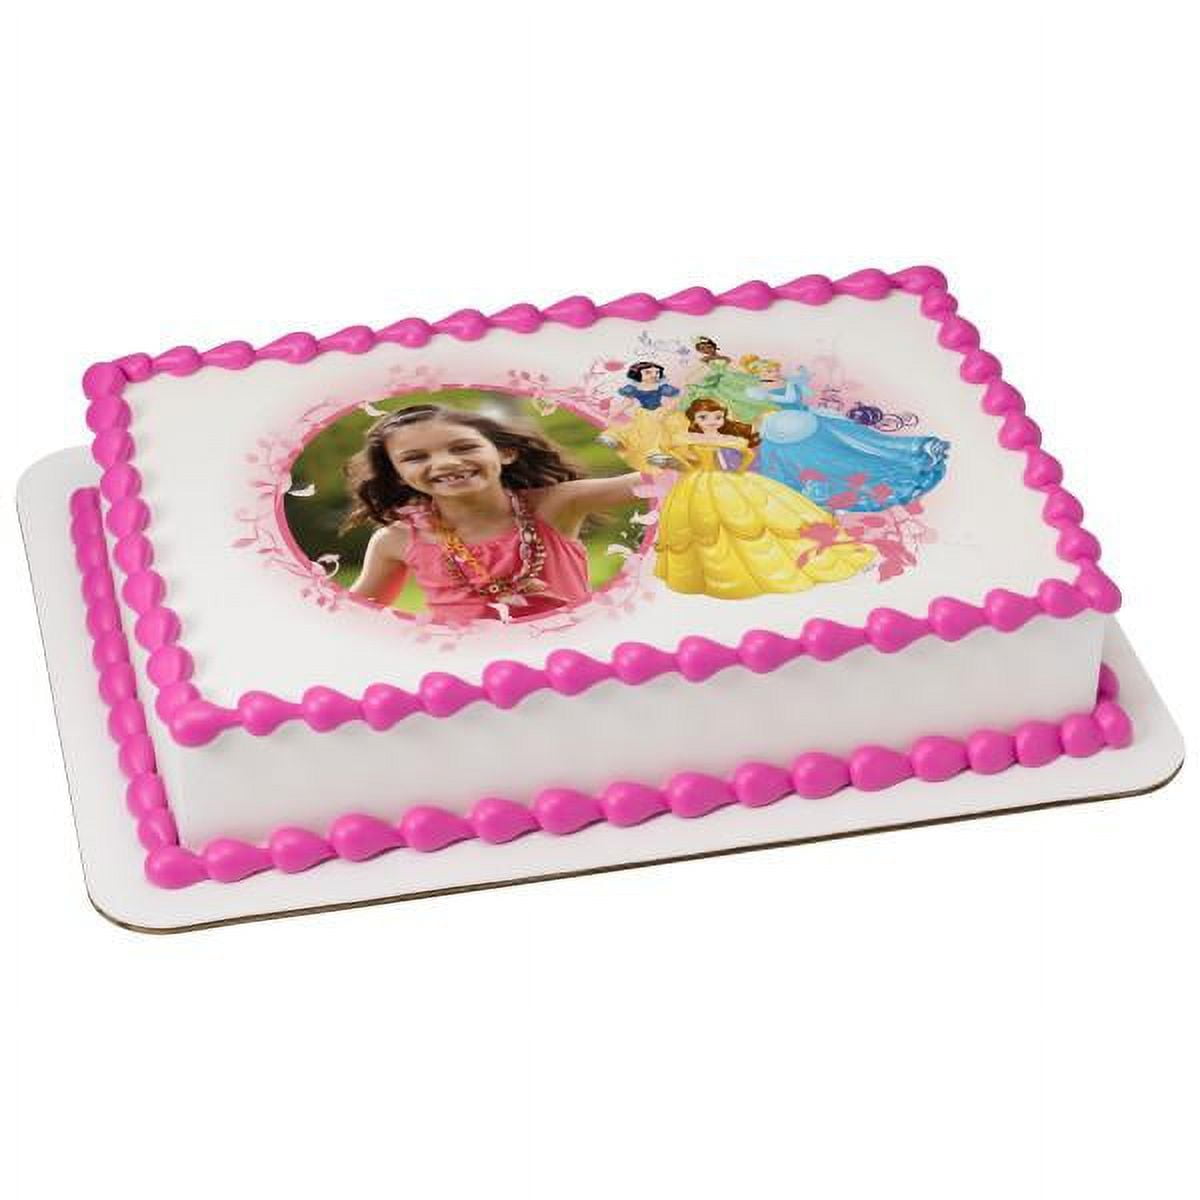 Cute Princess Sofia the First Cakes for Girls | Gurgaon Bakers